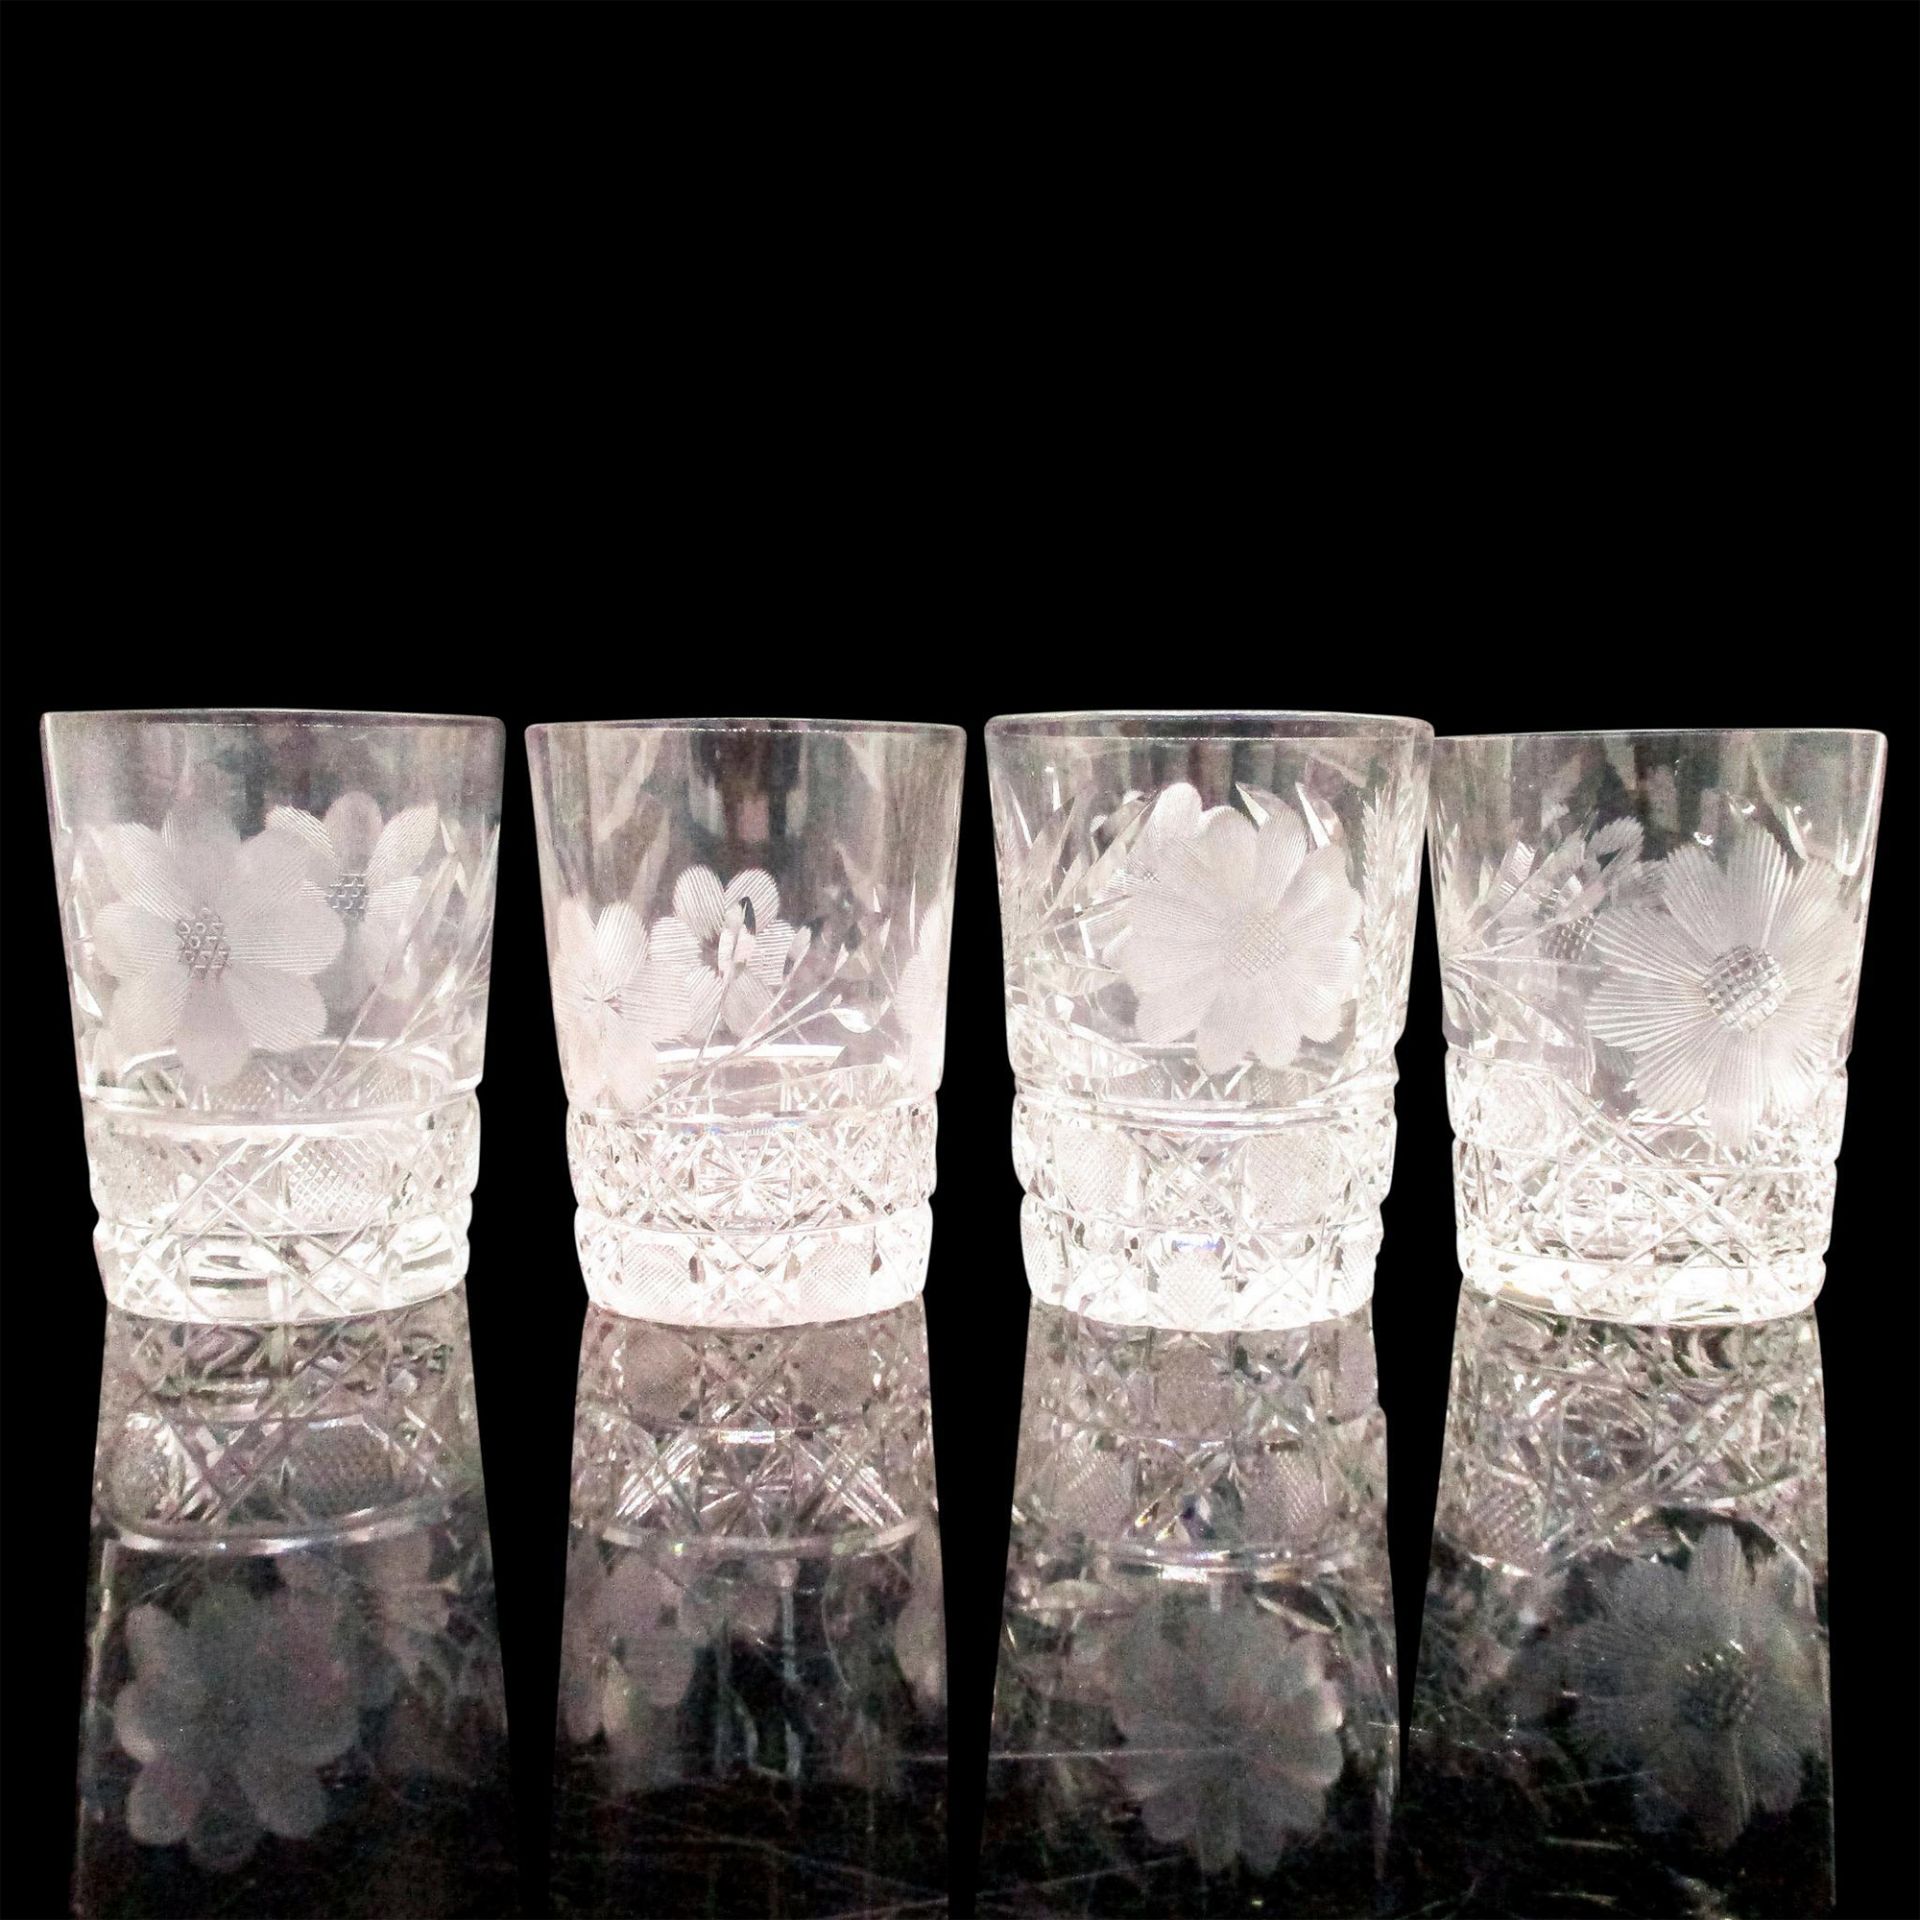 8pc Vintage Crystal Etched Whiskey Glasses - Image 4 of 8